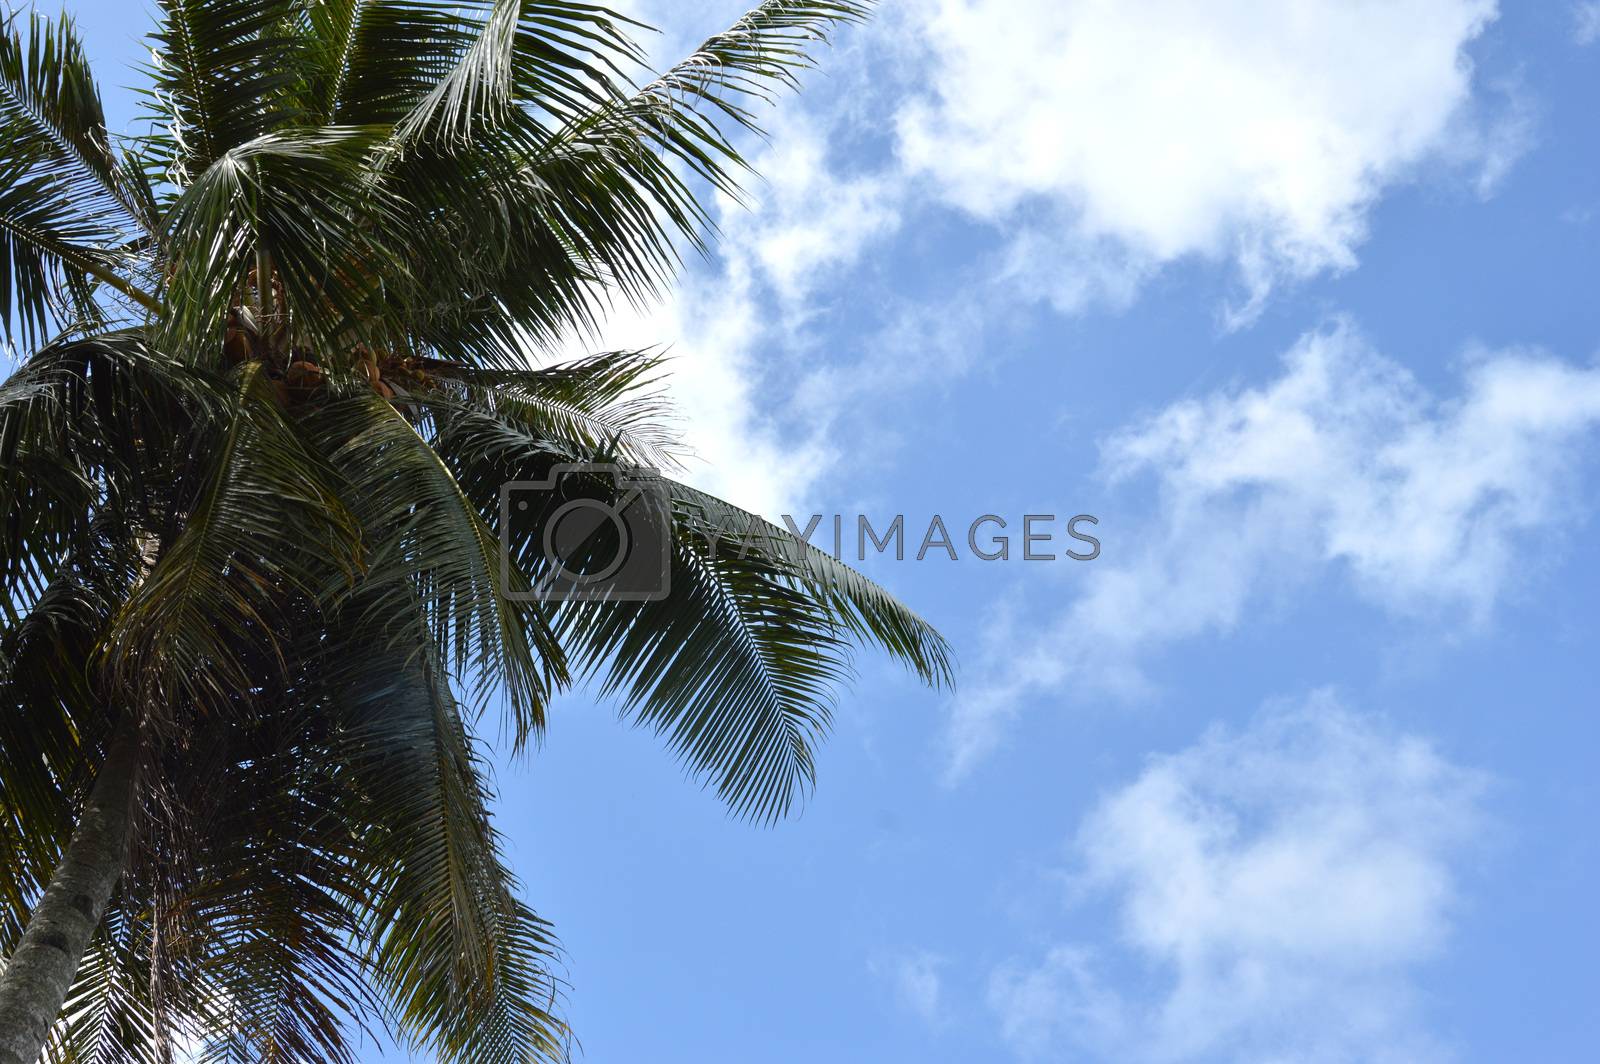 Royalty free image of coconut palm by antonihalim